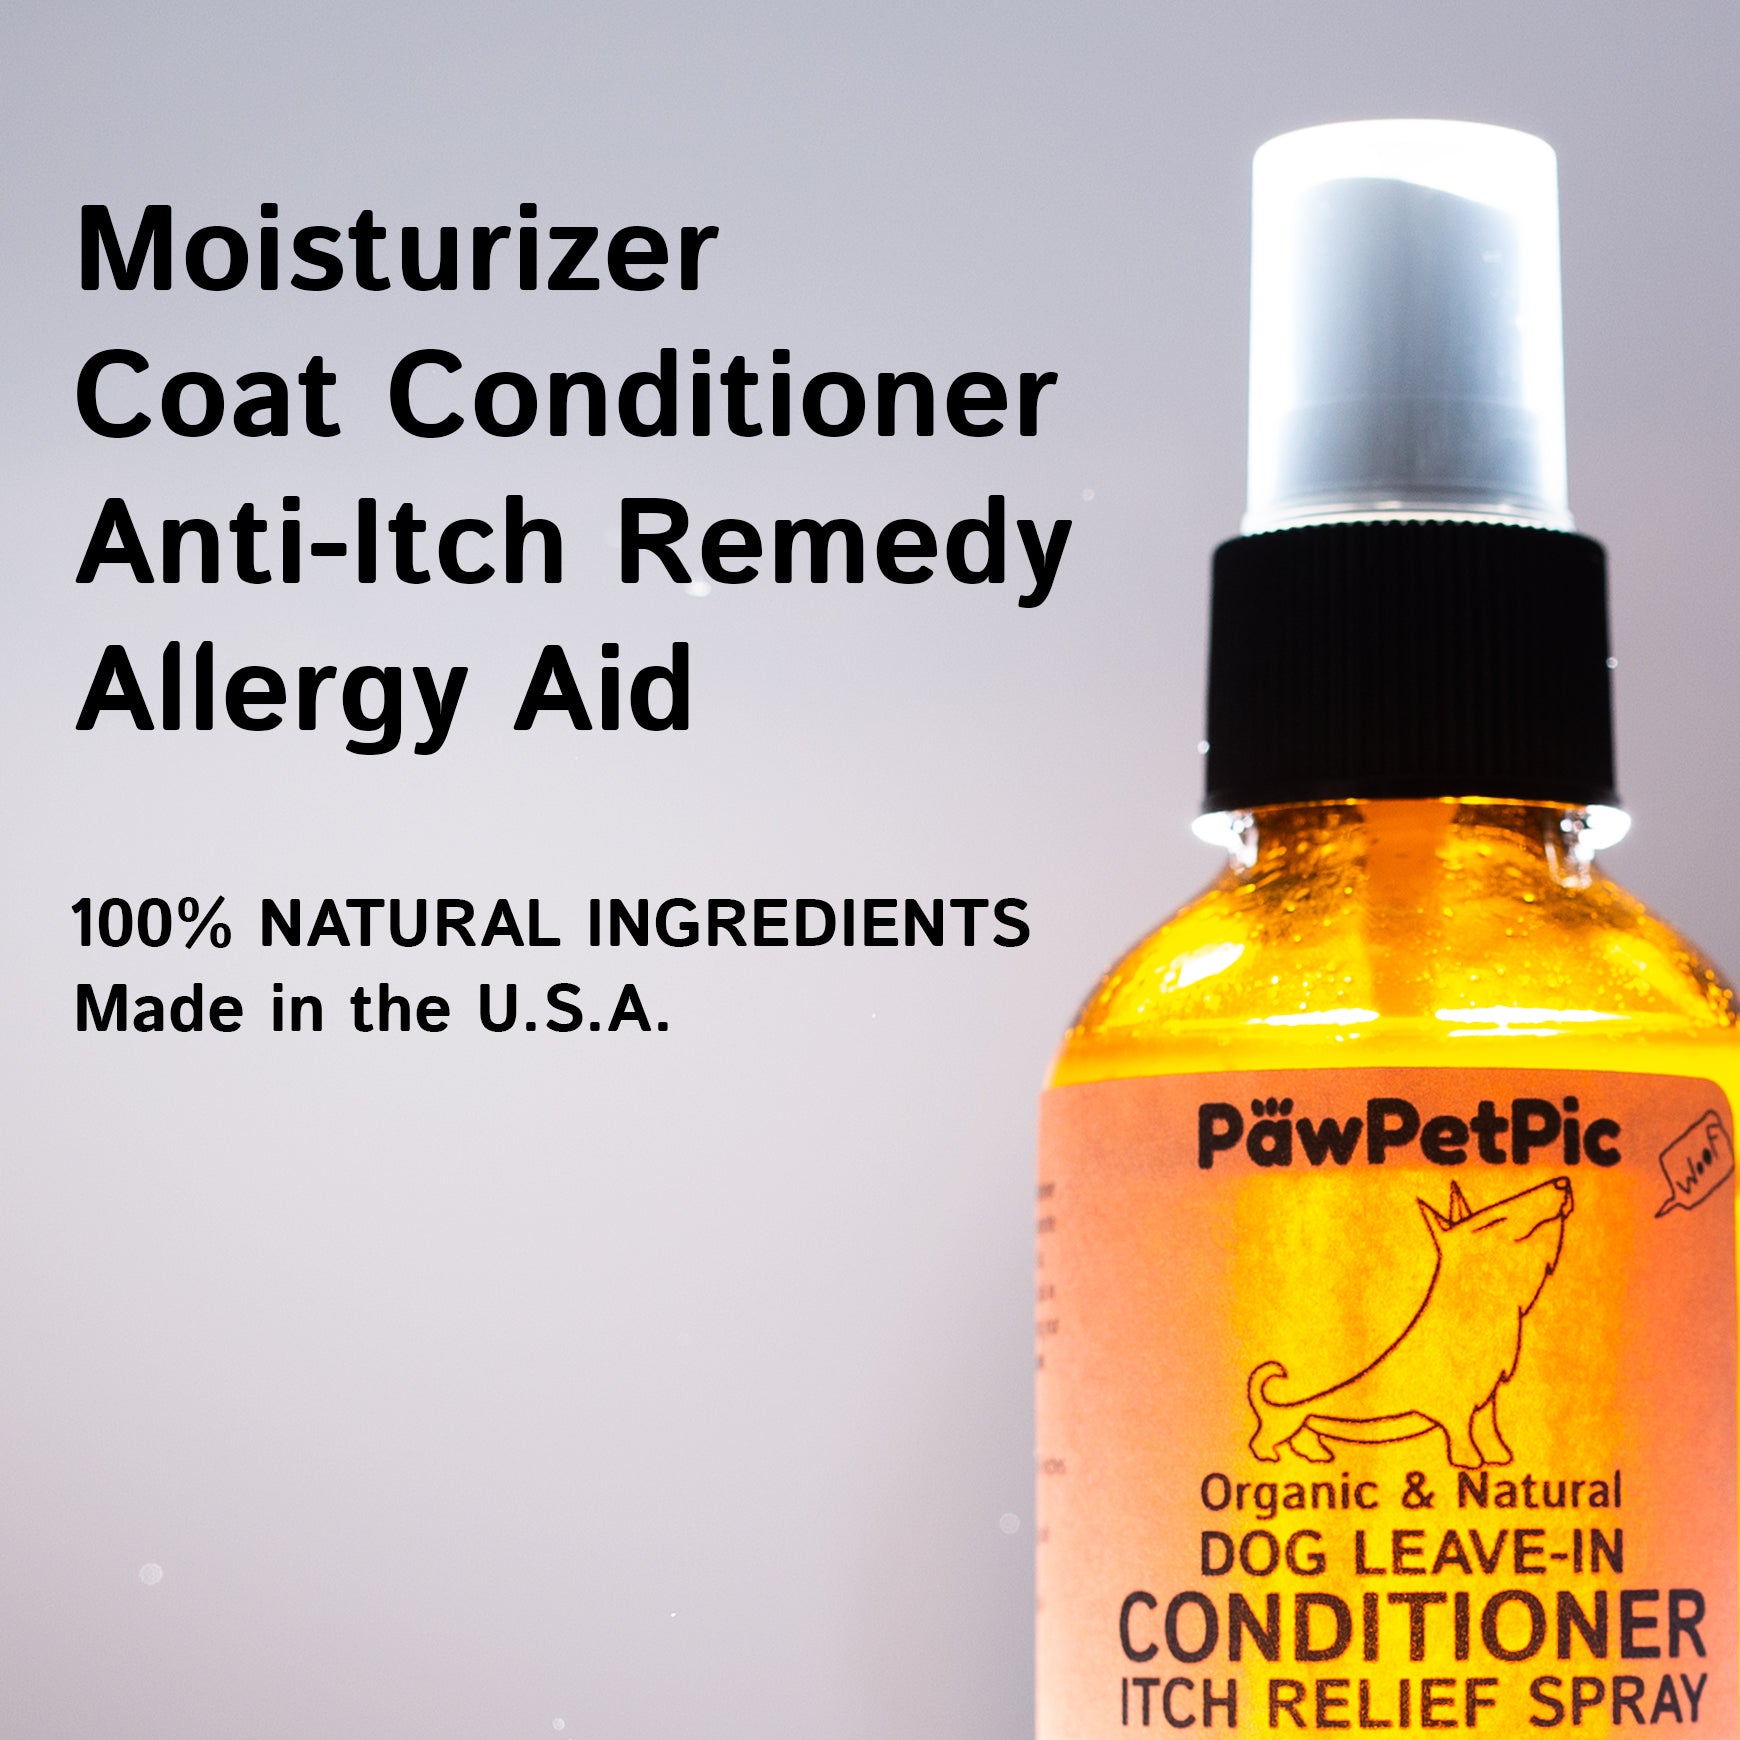 Skin Conditioner for Dogs / Itch Relief Spray - PawPetPic